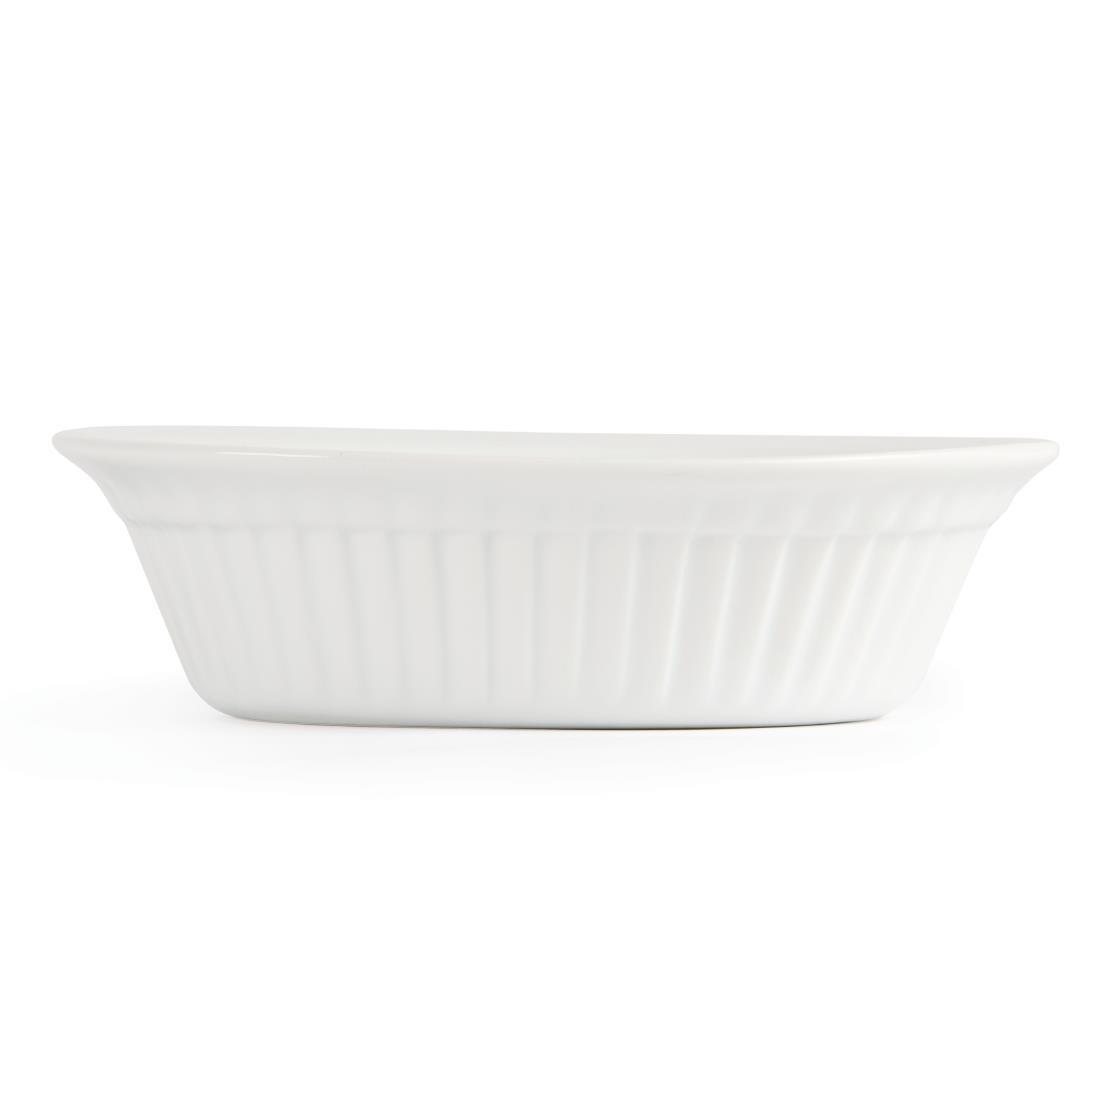 Olympia Whiteware Oval Pie Dishes 170mm (Pack of 6) - C110  - 2